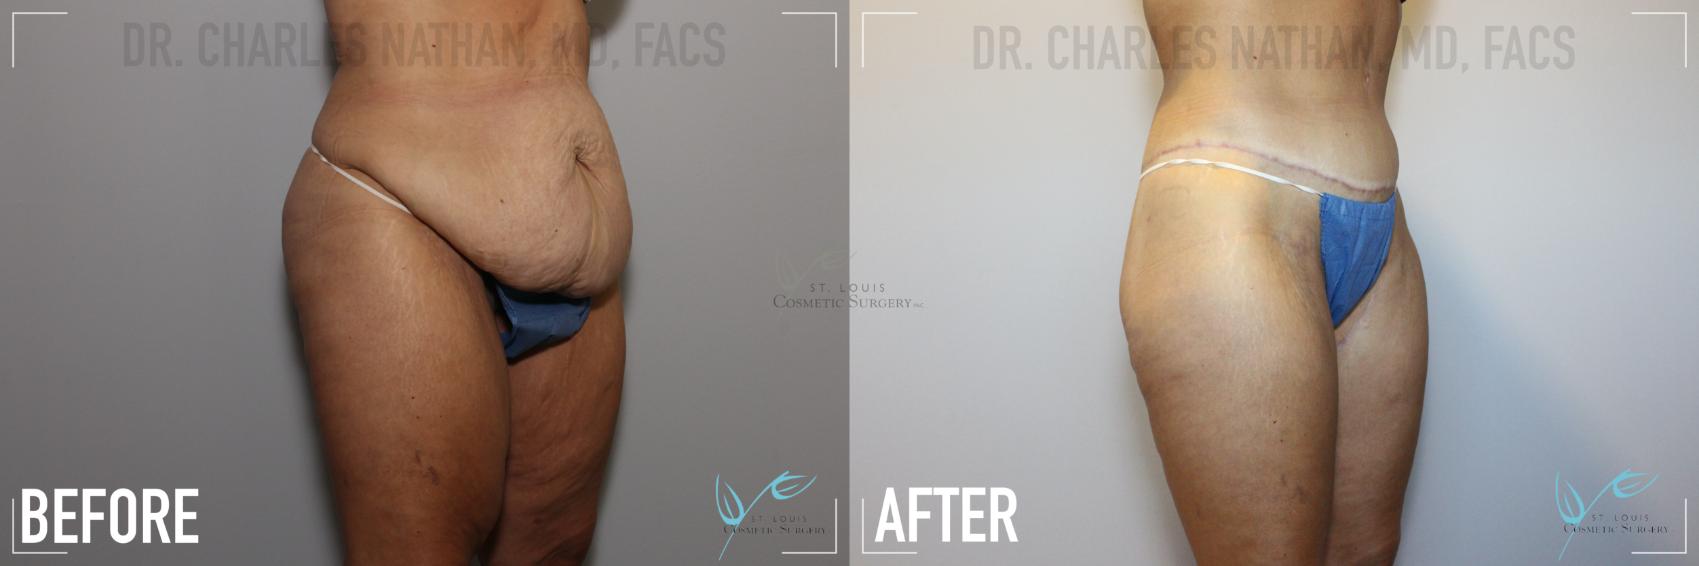 Body Lift Before & After Photo | St. Louis, MO | St. Louis Cosmetic Surgery